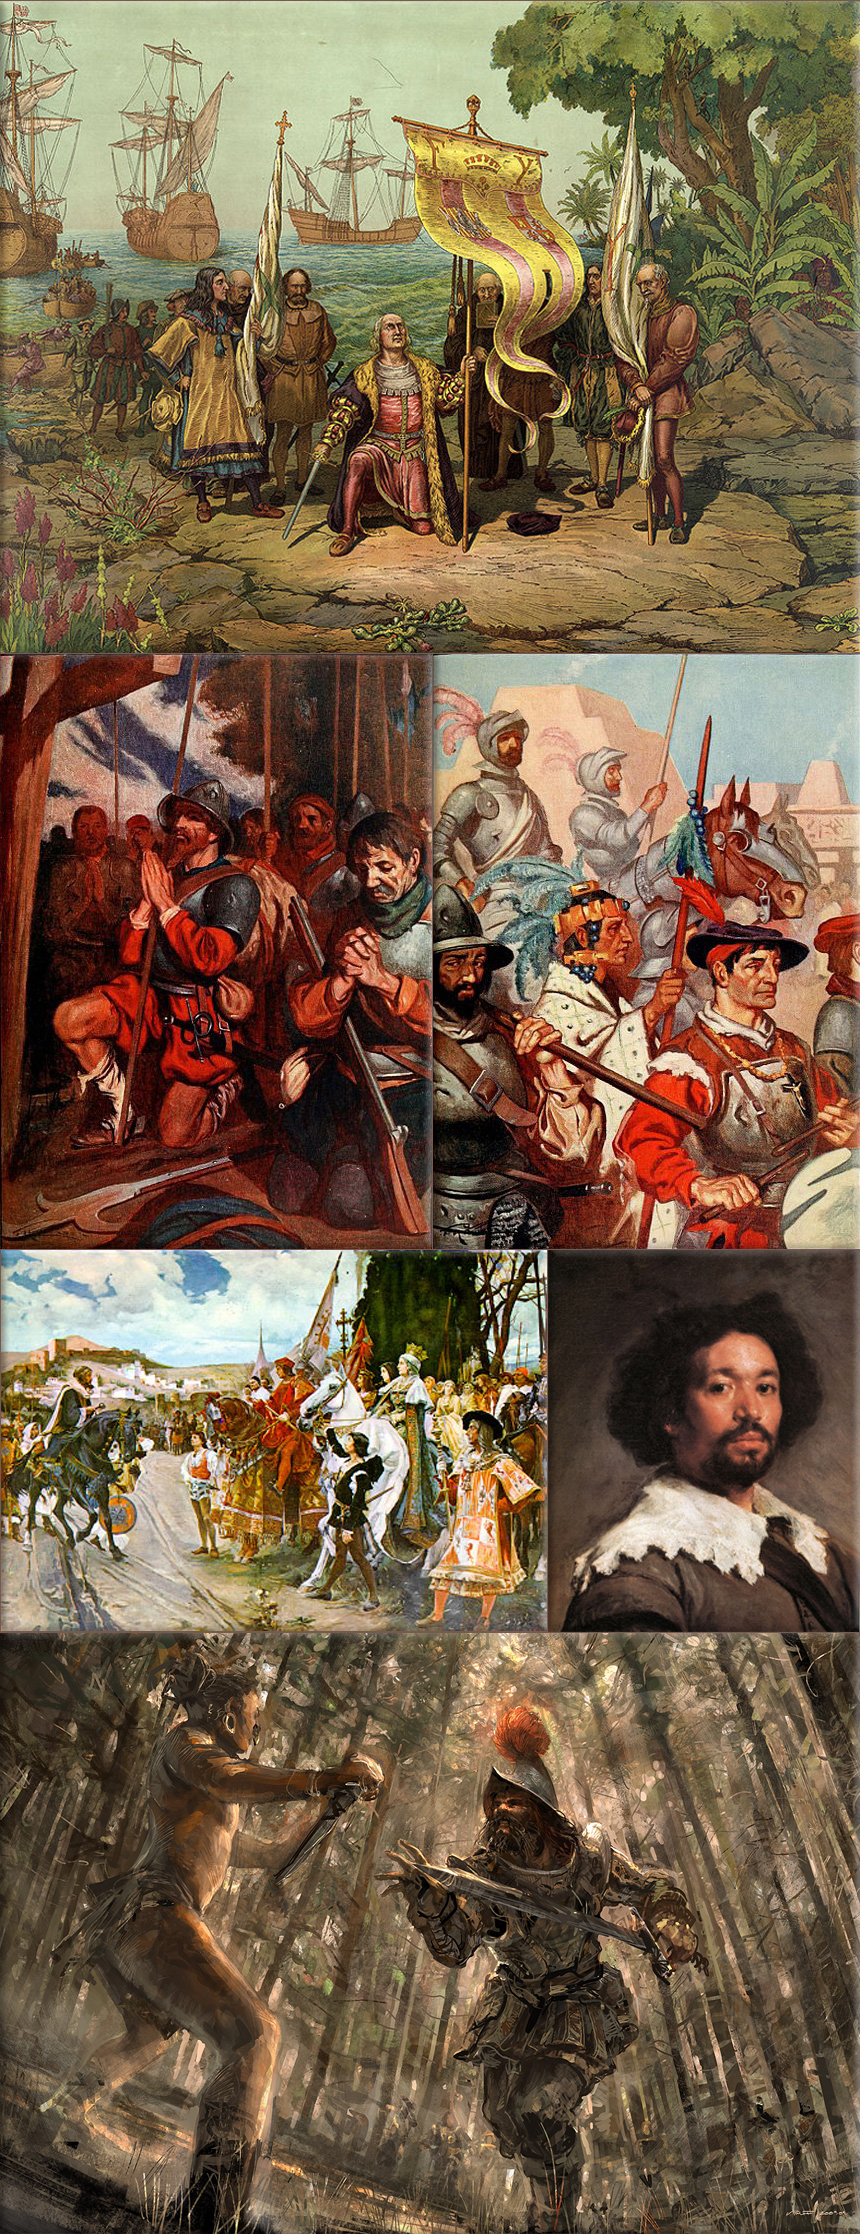 Conquistadors (Spanish 'conquerors') were soldiers, explorers, and adventurers at the service of the Spanish Empire (sailing beyond Europe, conquering territory and opening trade routes, colonizing much of the world for Spain and Portugal in the 15th, 16th, and 17th centuries)